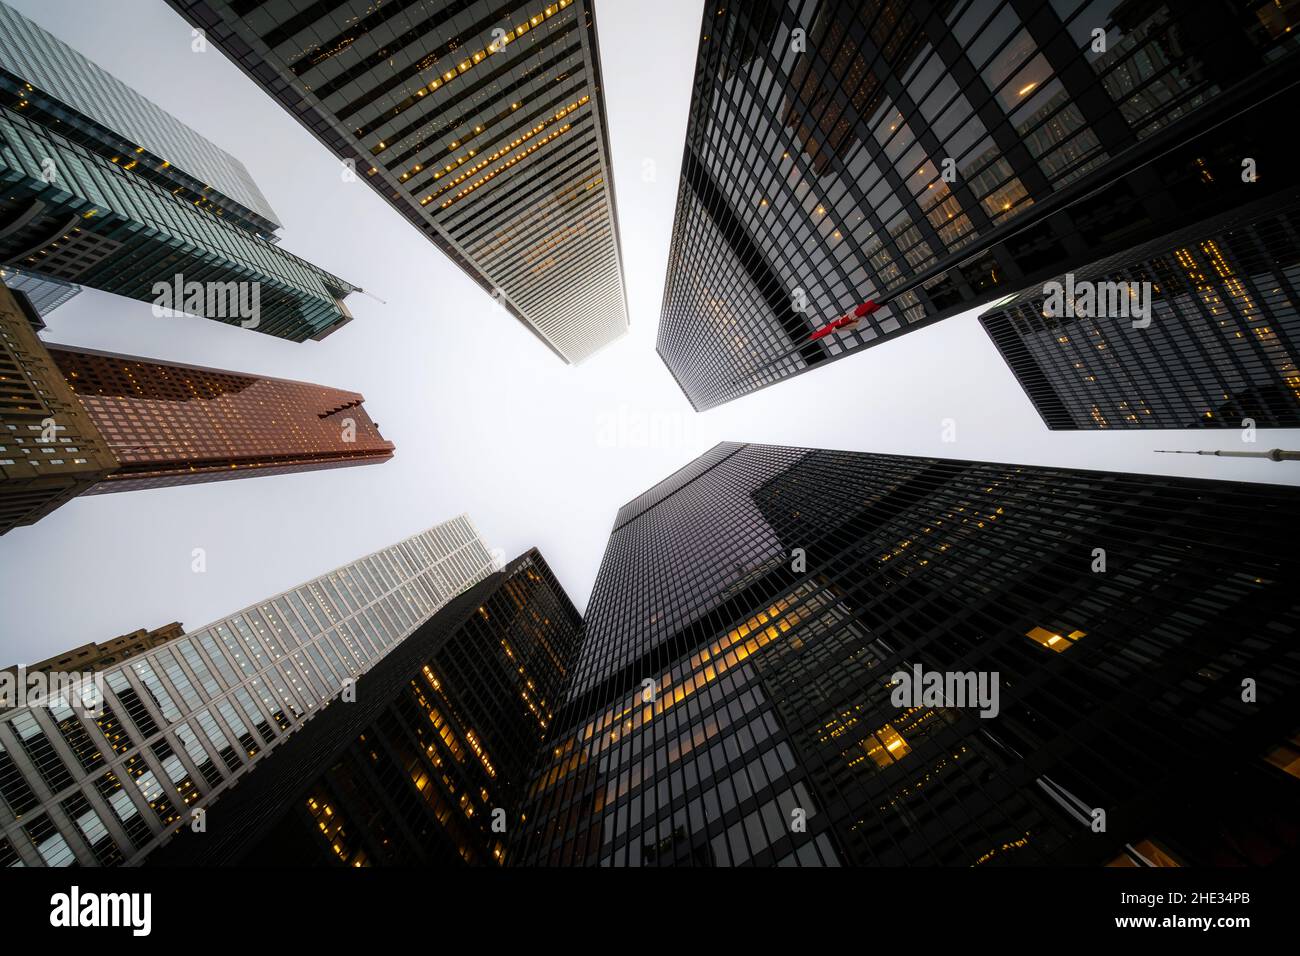 Business and finance concept, looking up at high rise office building architecture at dusk in the financial district of a modern metropolis. Stock Photo